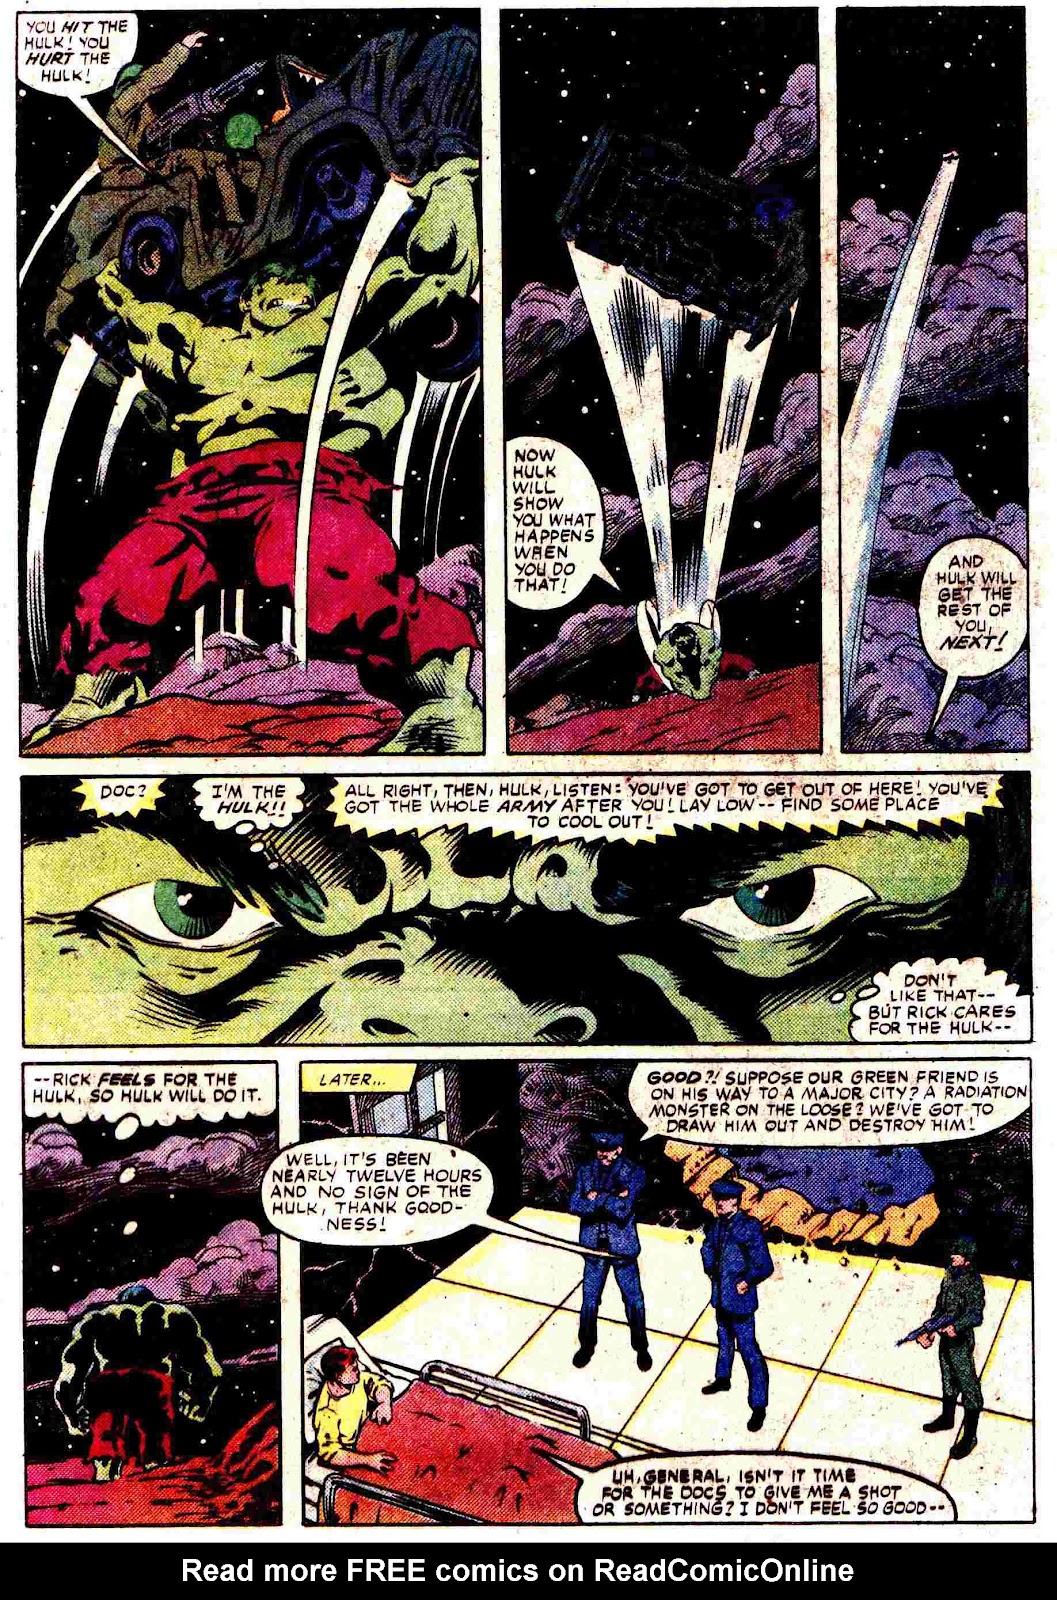 What If? (1977) issue 45 - The Hulk went Berserk - Page 11